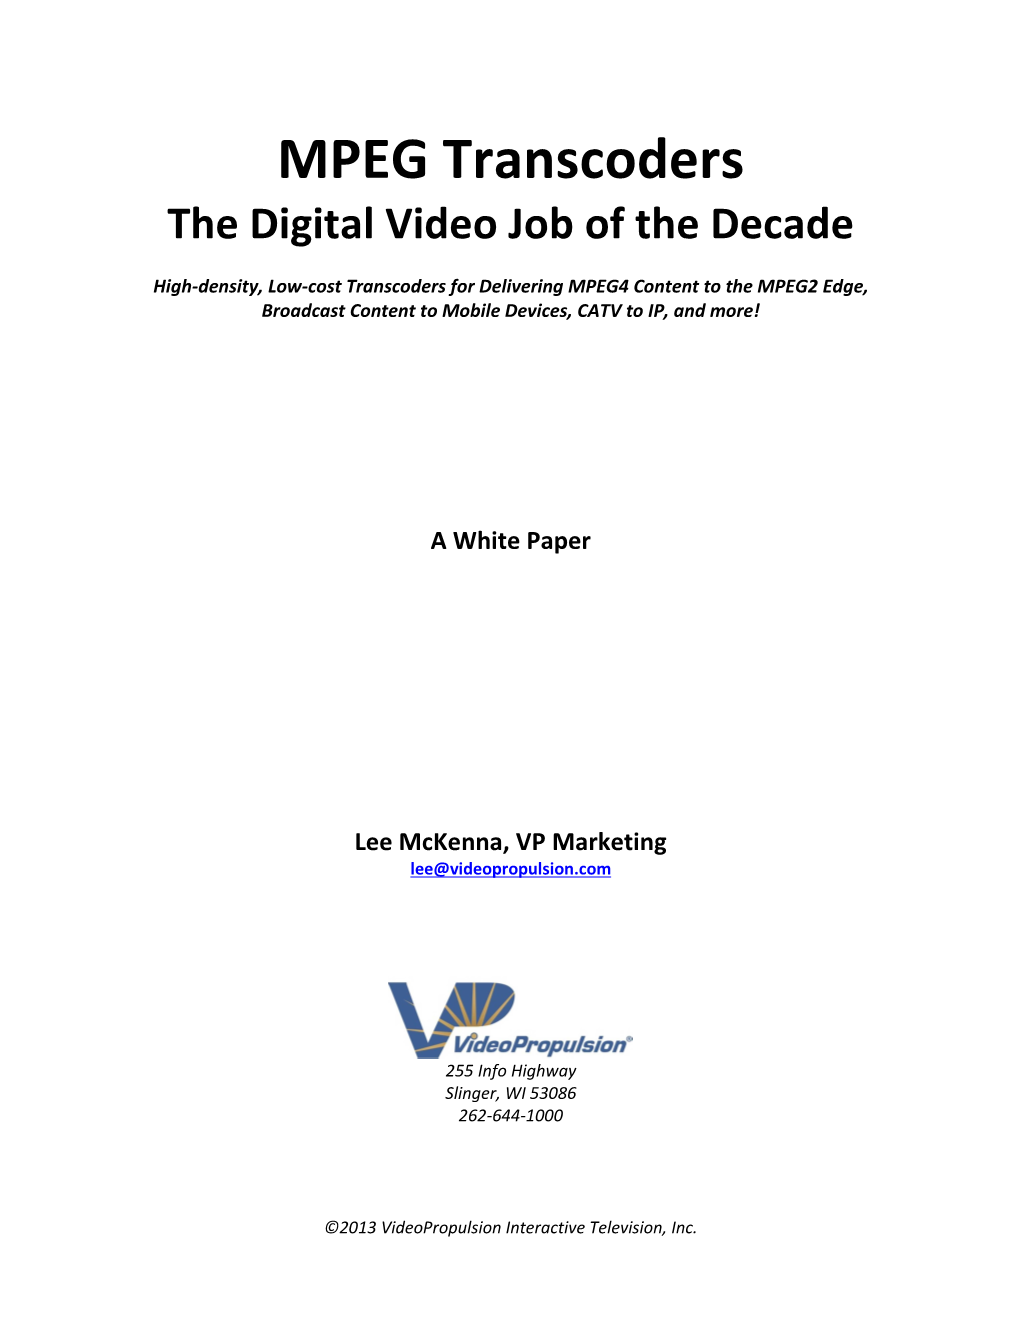 MPEG Transcoders the Digital Video Job of the Decade